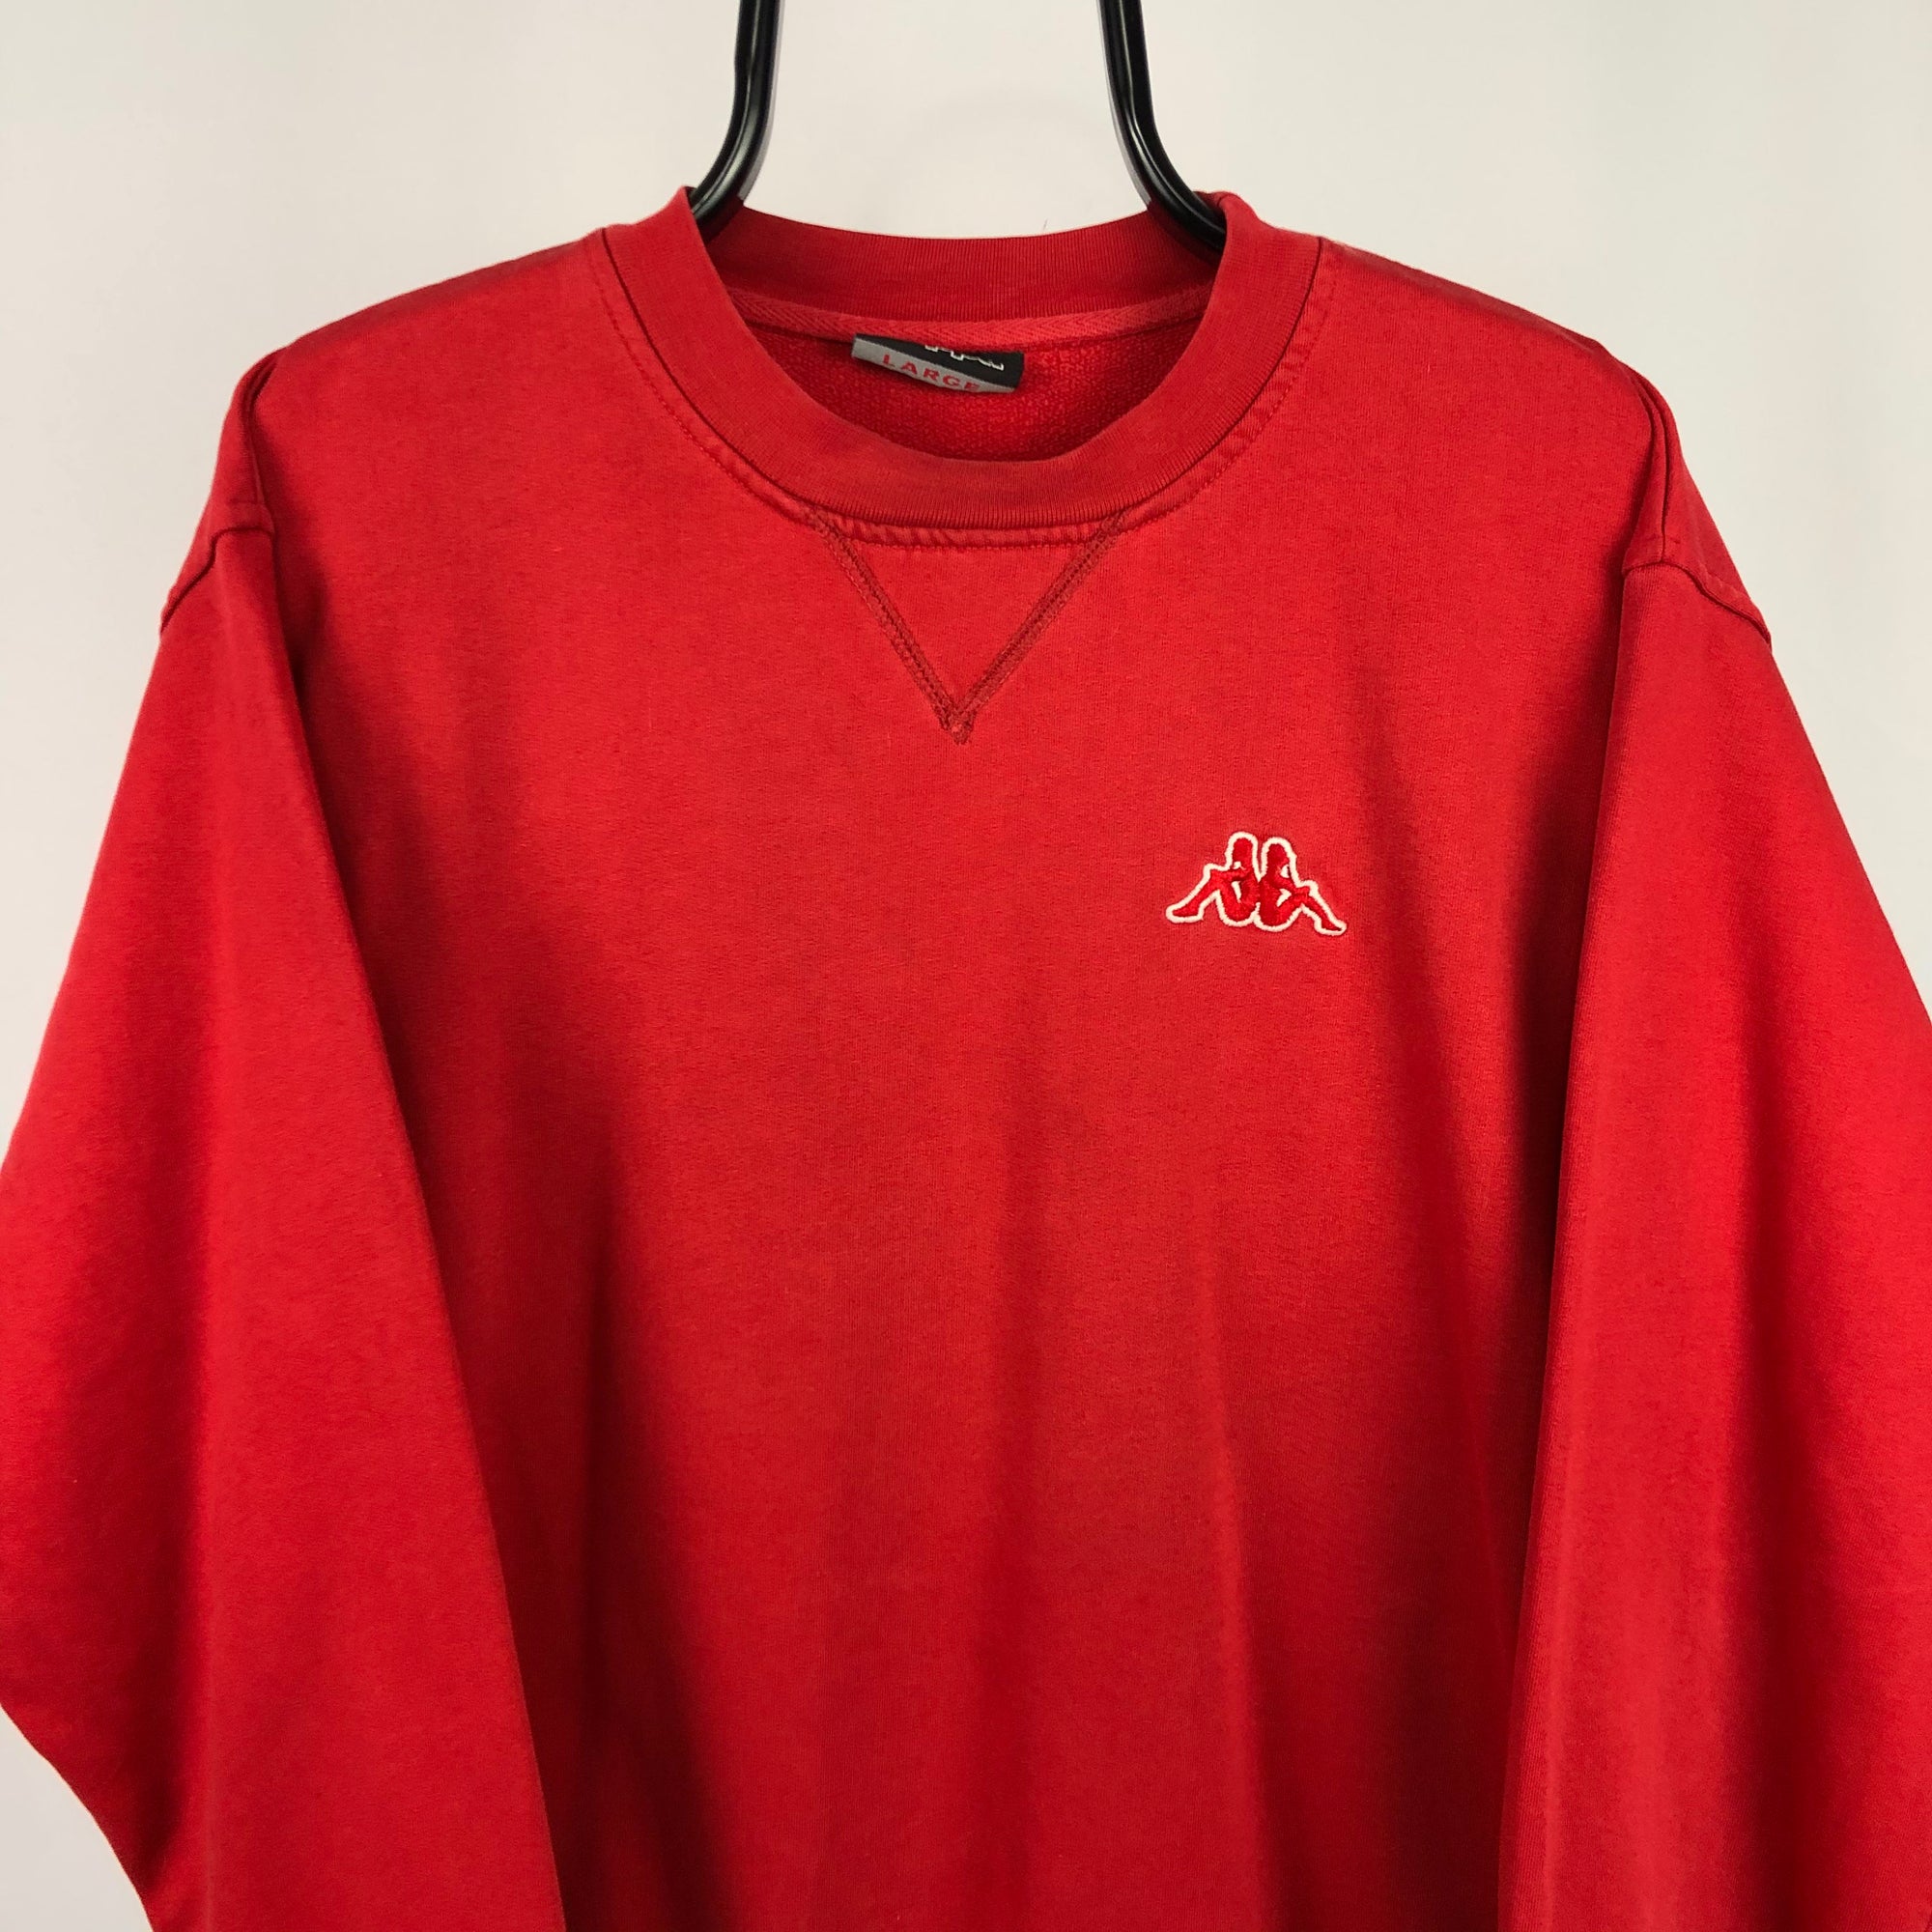 Vintage Kappa Embroidered Small Logo Sweatshirt in Red - Men's Large/Women's XL